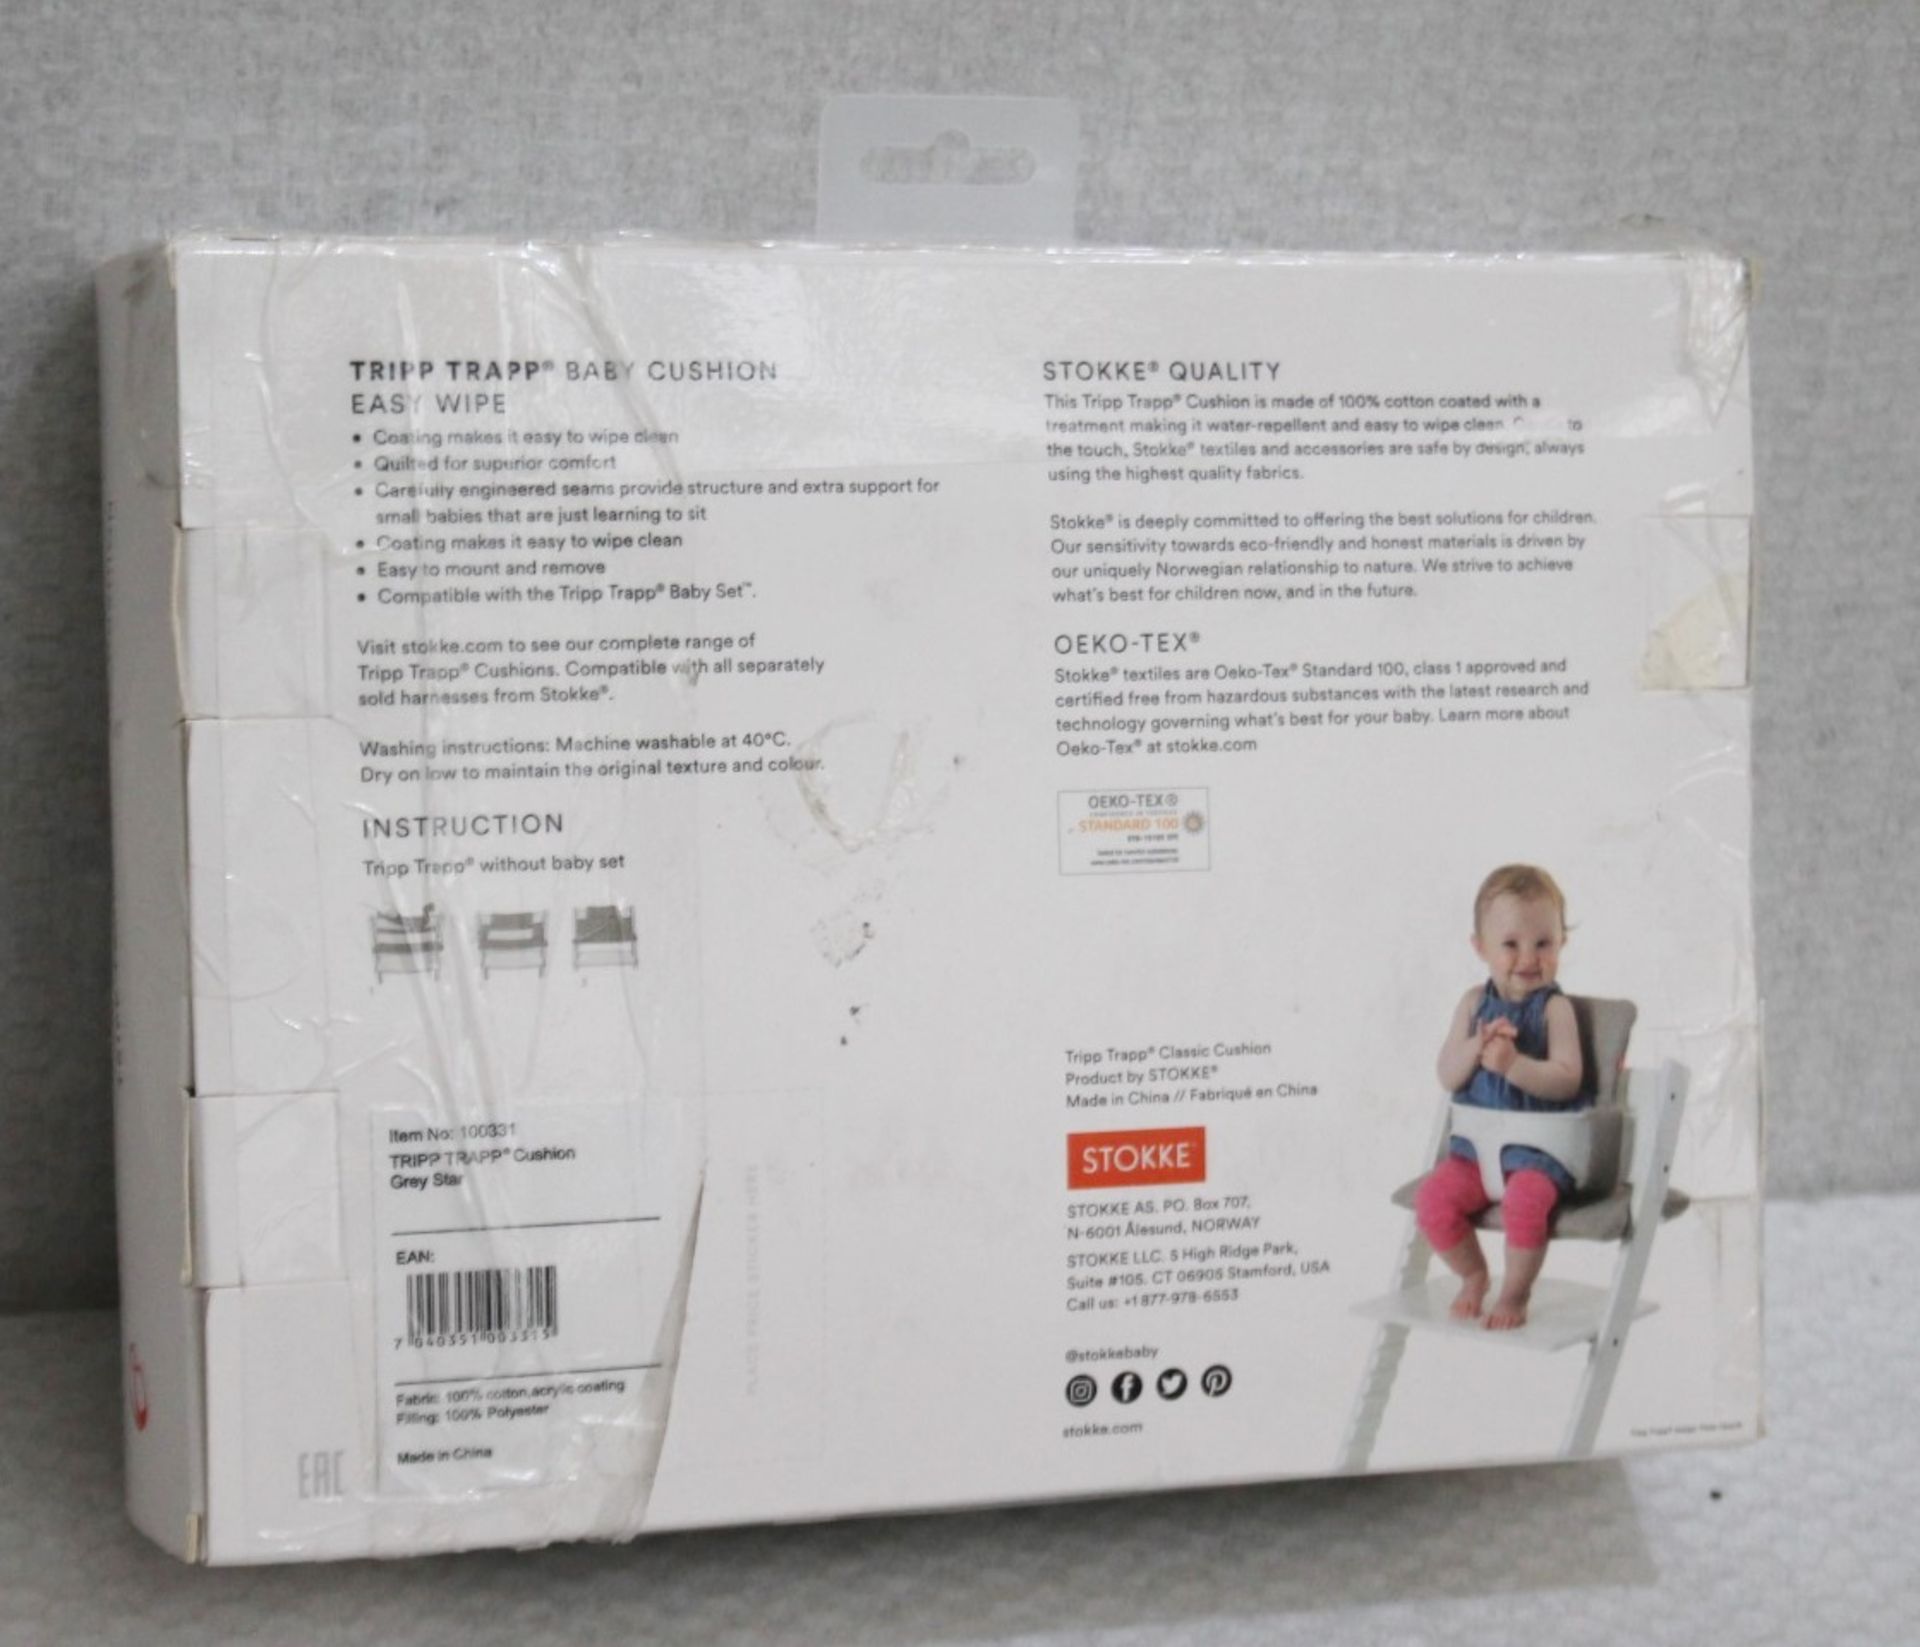 1 x STOKKE Tripp Trap Classic Cushion Accessory - Colour: Grey Stars - Unused Boxed Stock - Ref: - Image 4 of 4